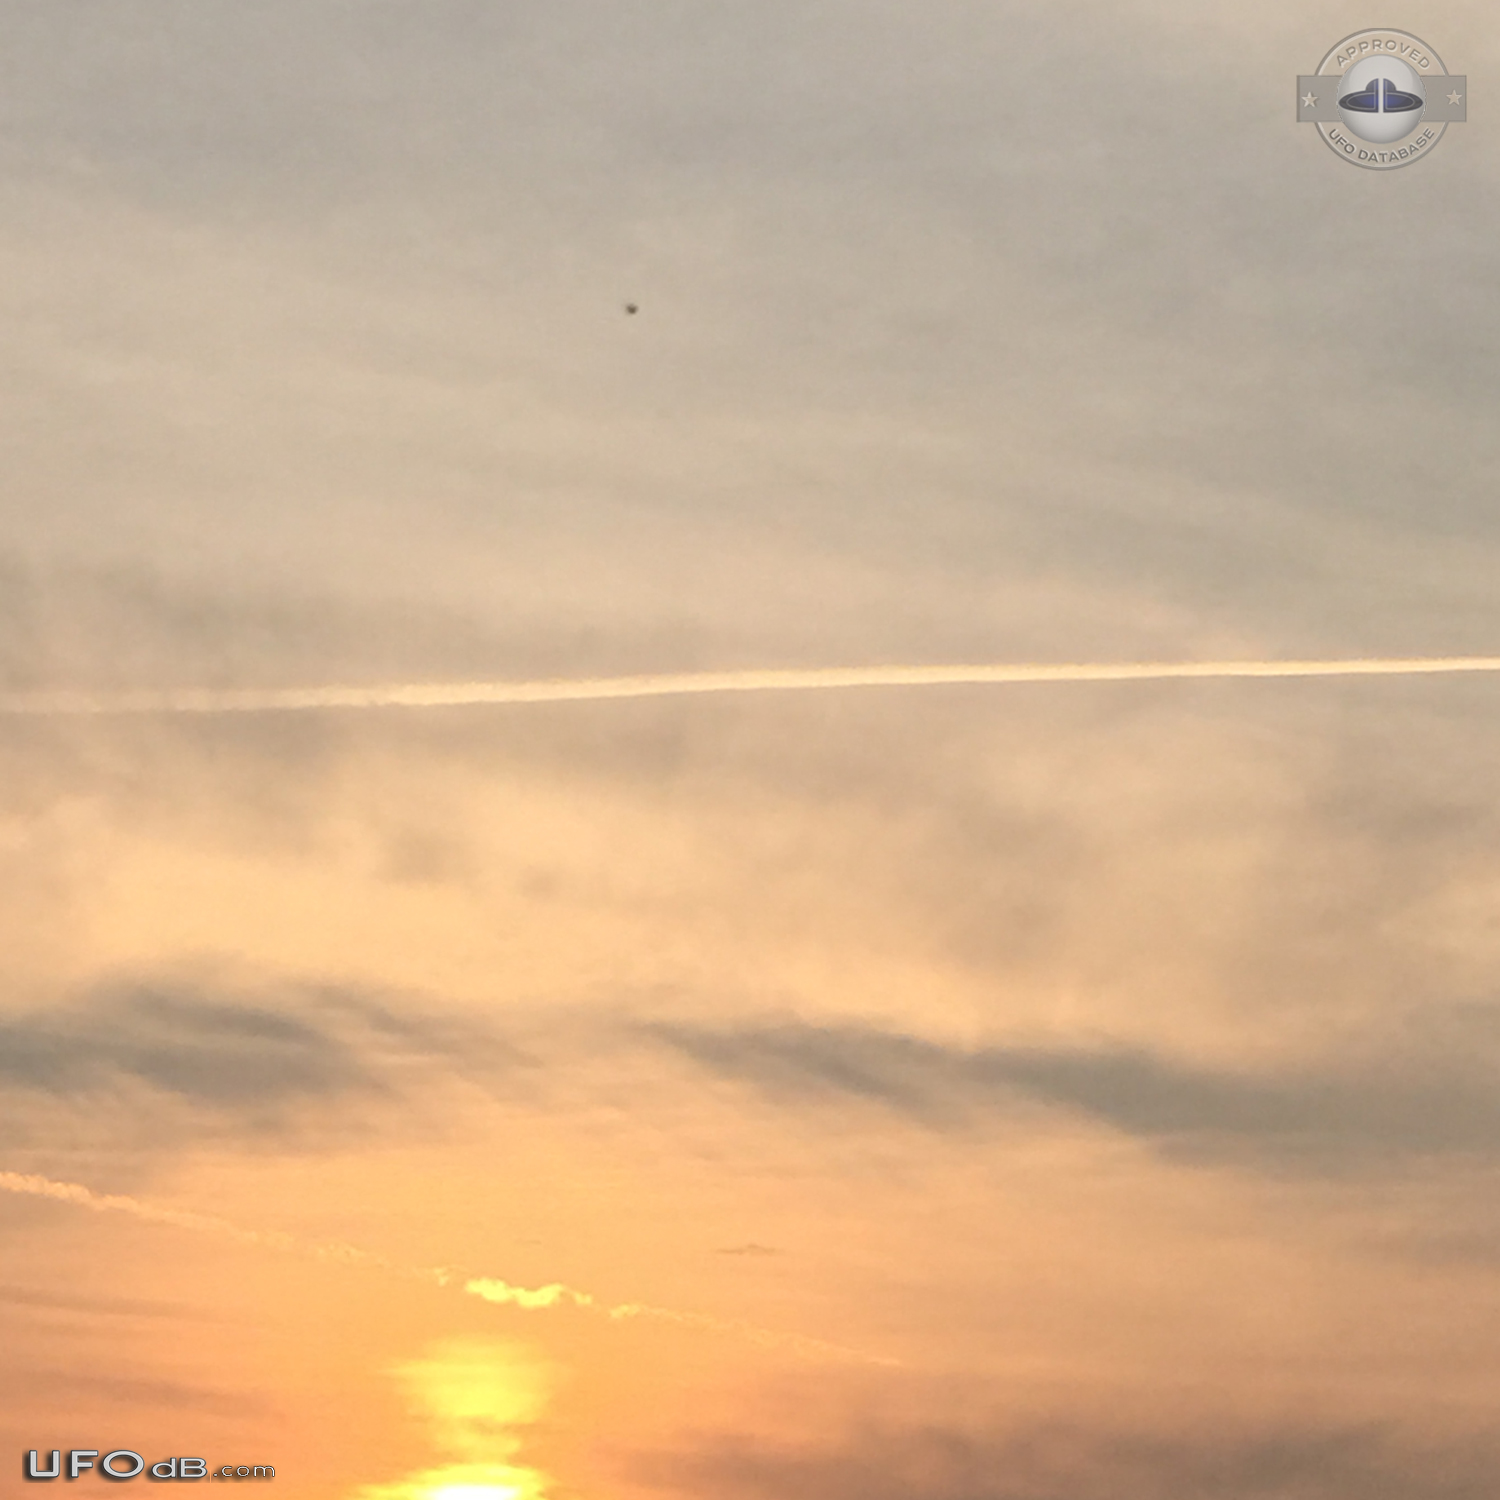 UFO on the 2nd of 3 consecutive photos - Edmonton Alberta Canada 2015 UFO Picture #717-2